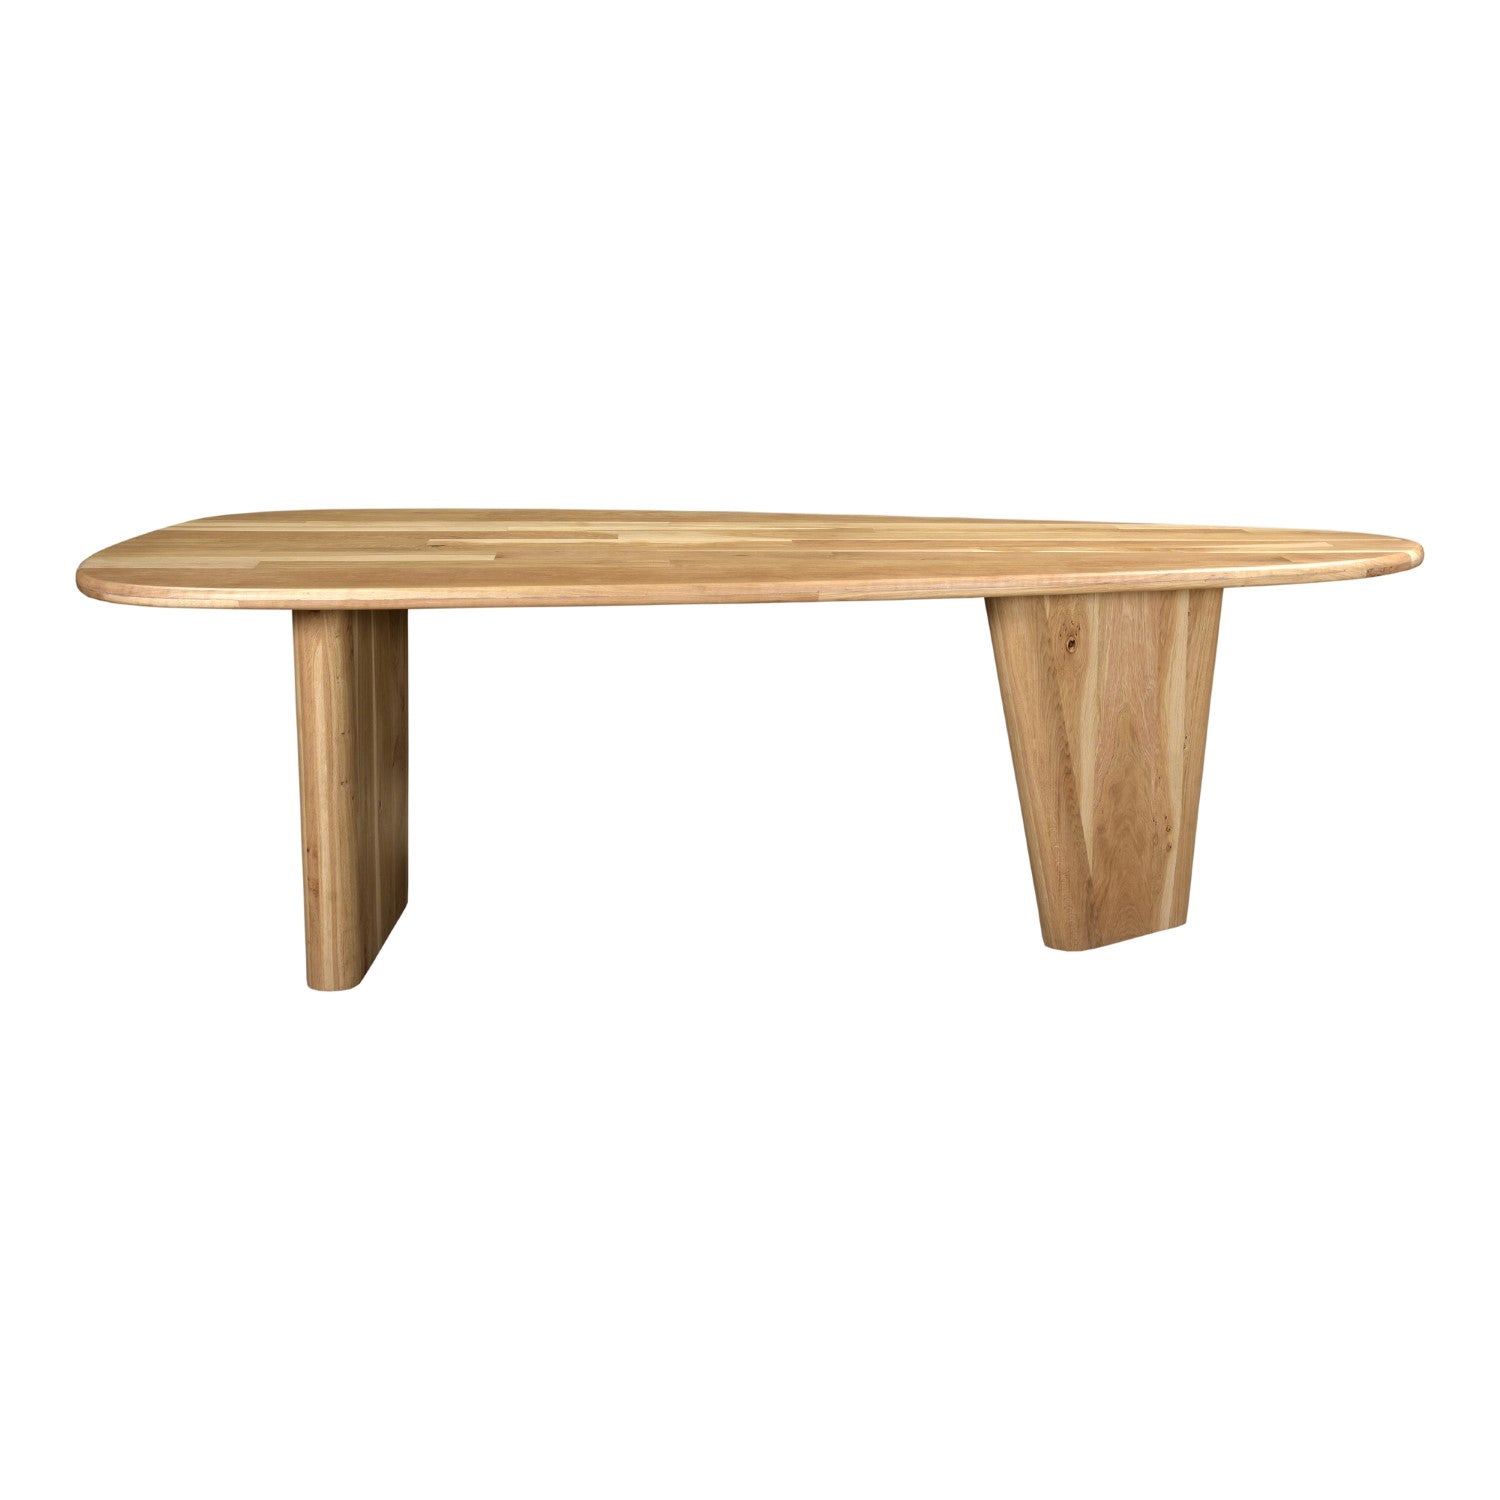 Shop Appro Dining Table | Burke Decor